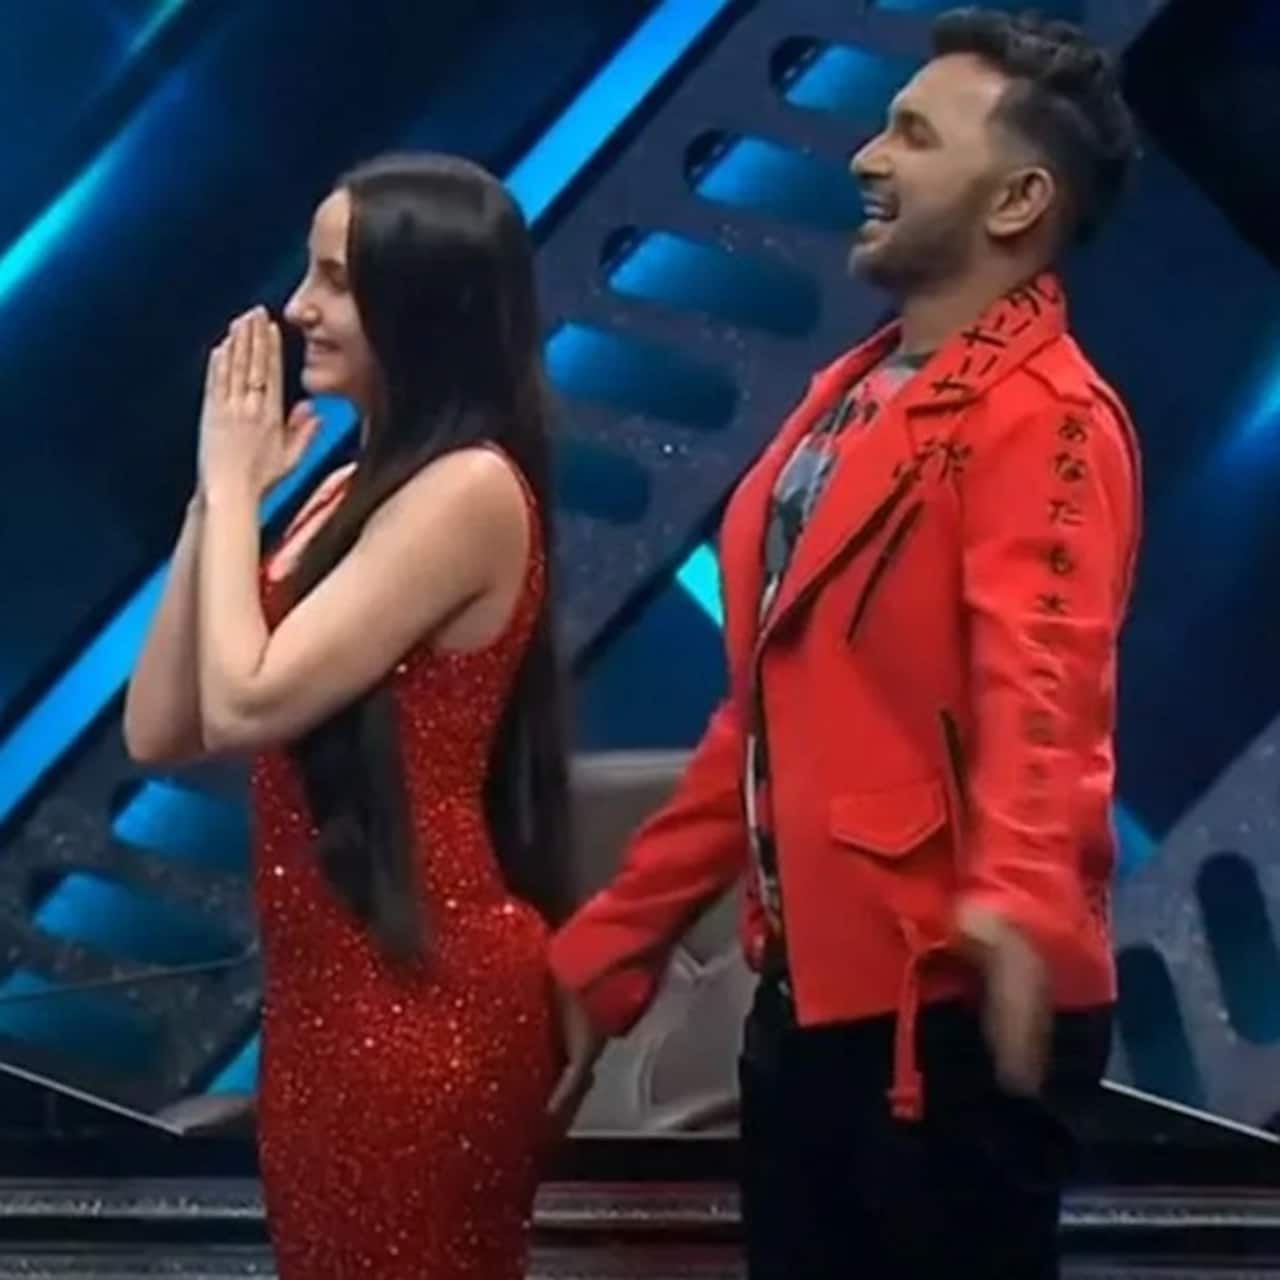 Nora Fatehi and Terence Lewis